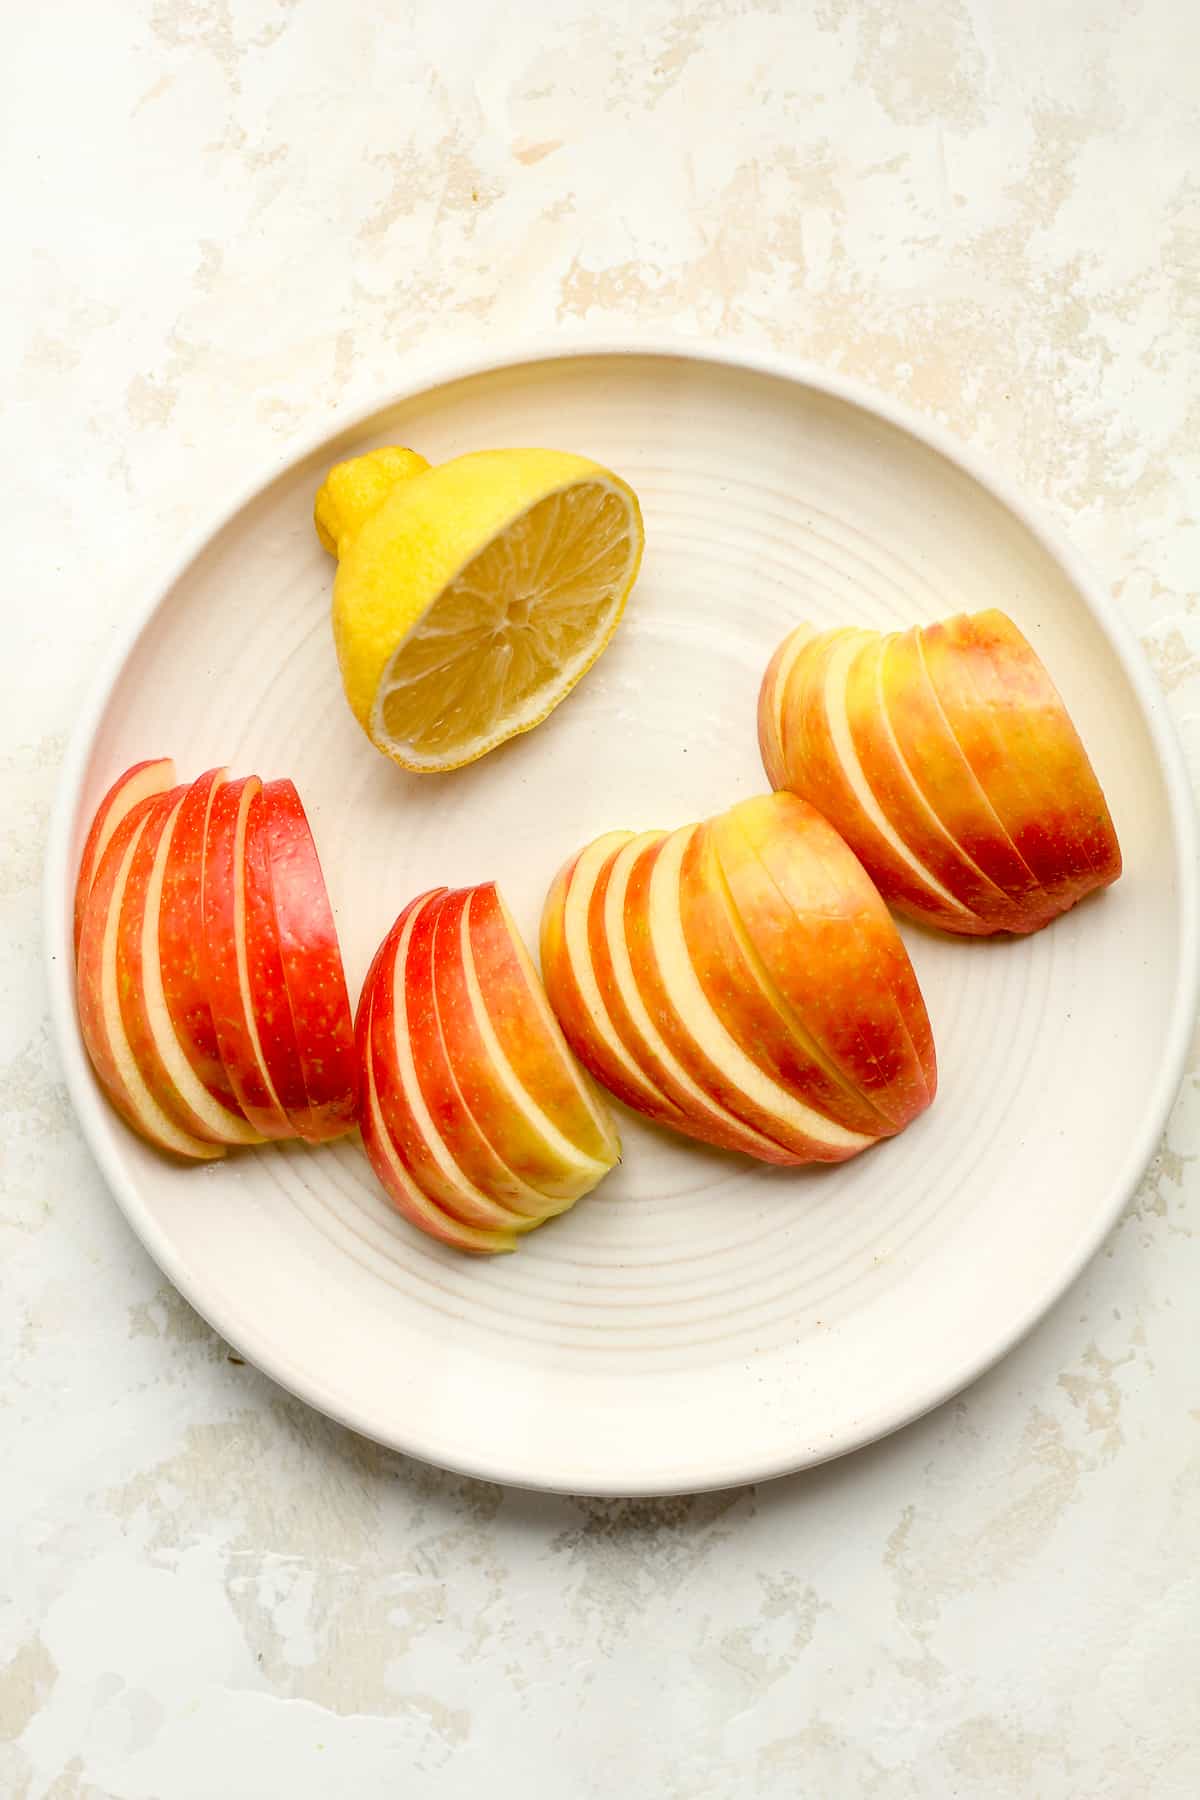 A plate of apples slices with a half lemon.